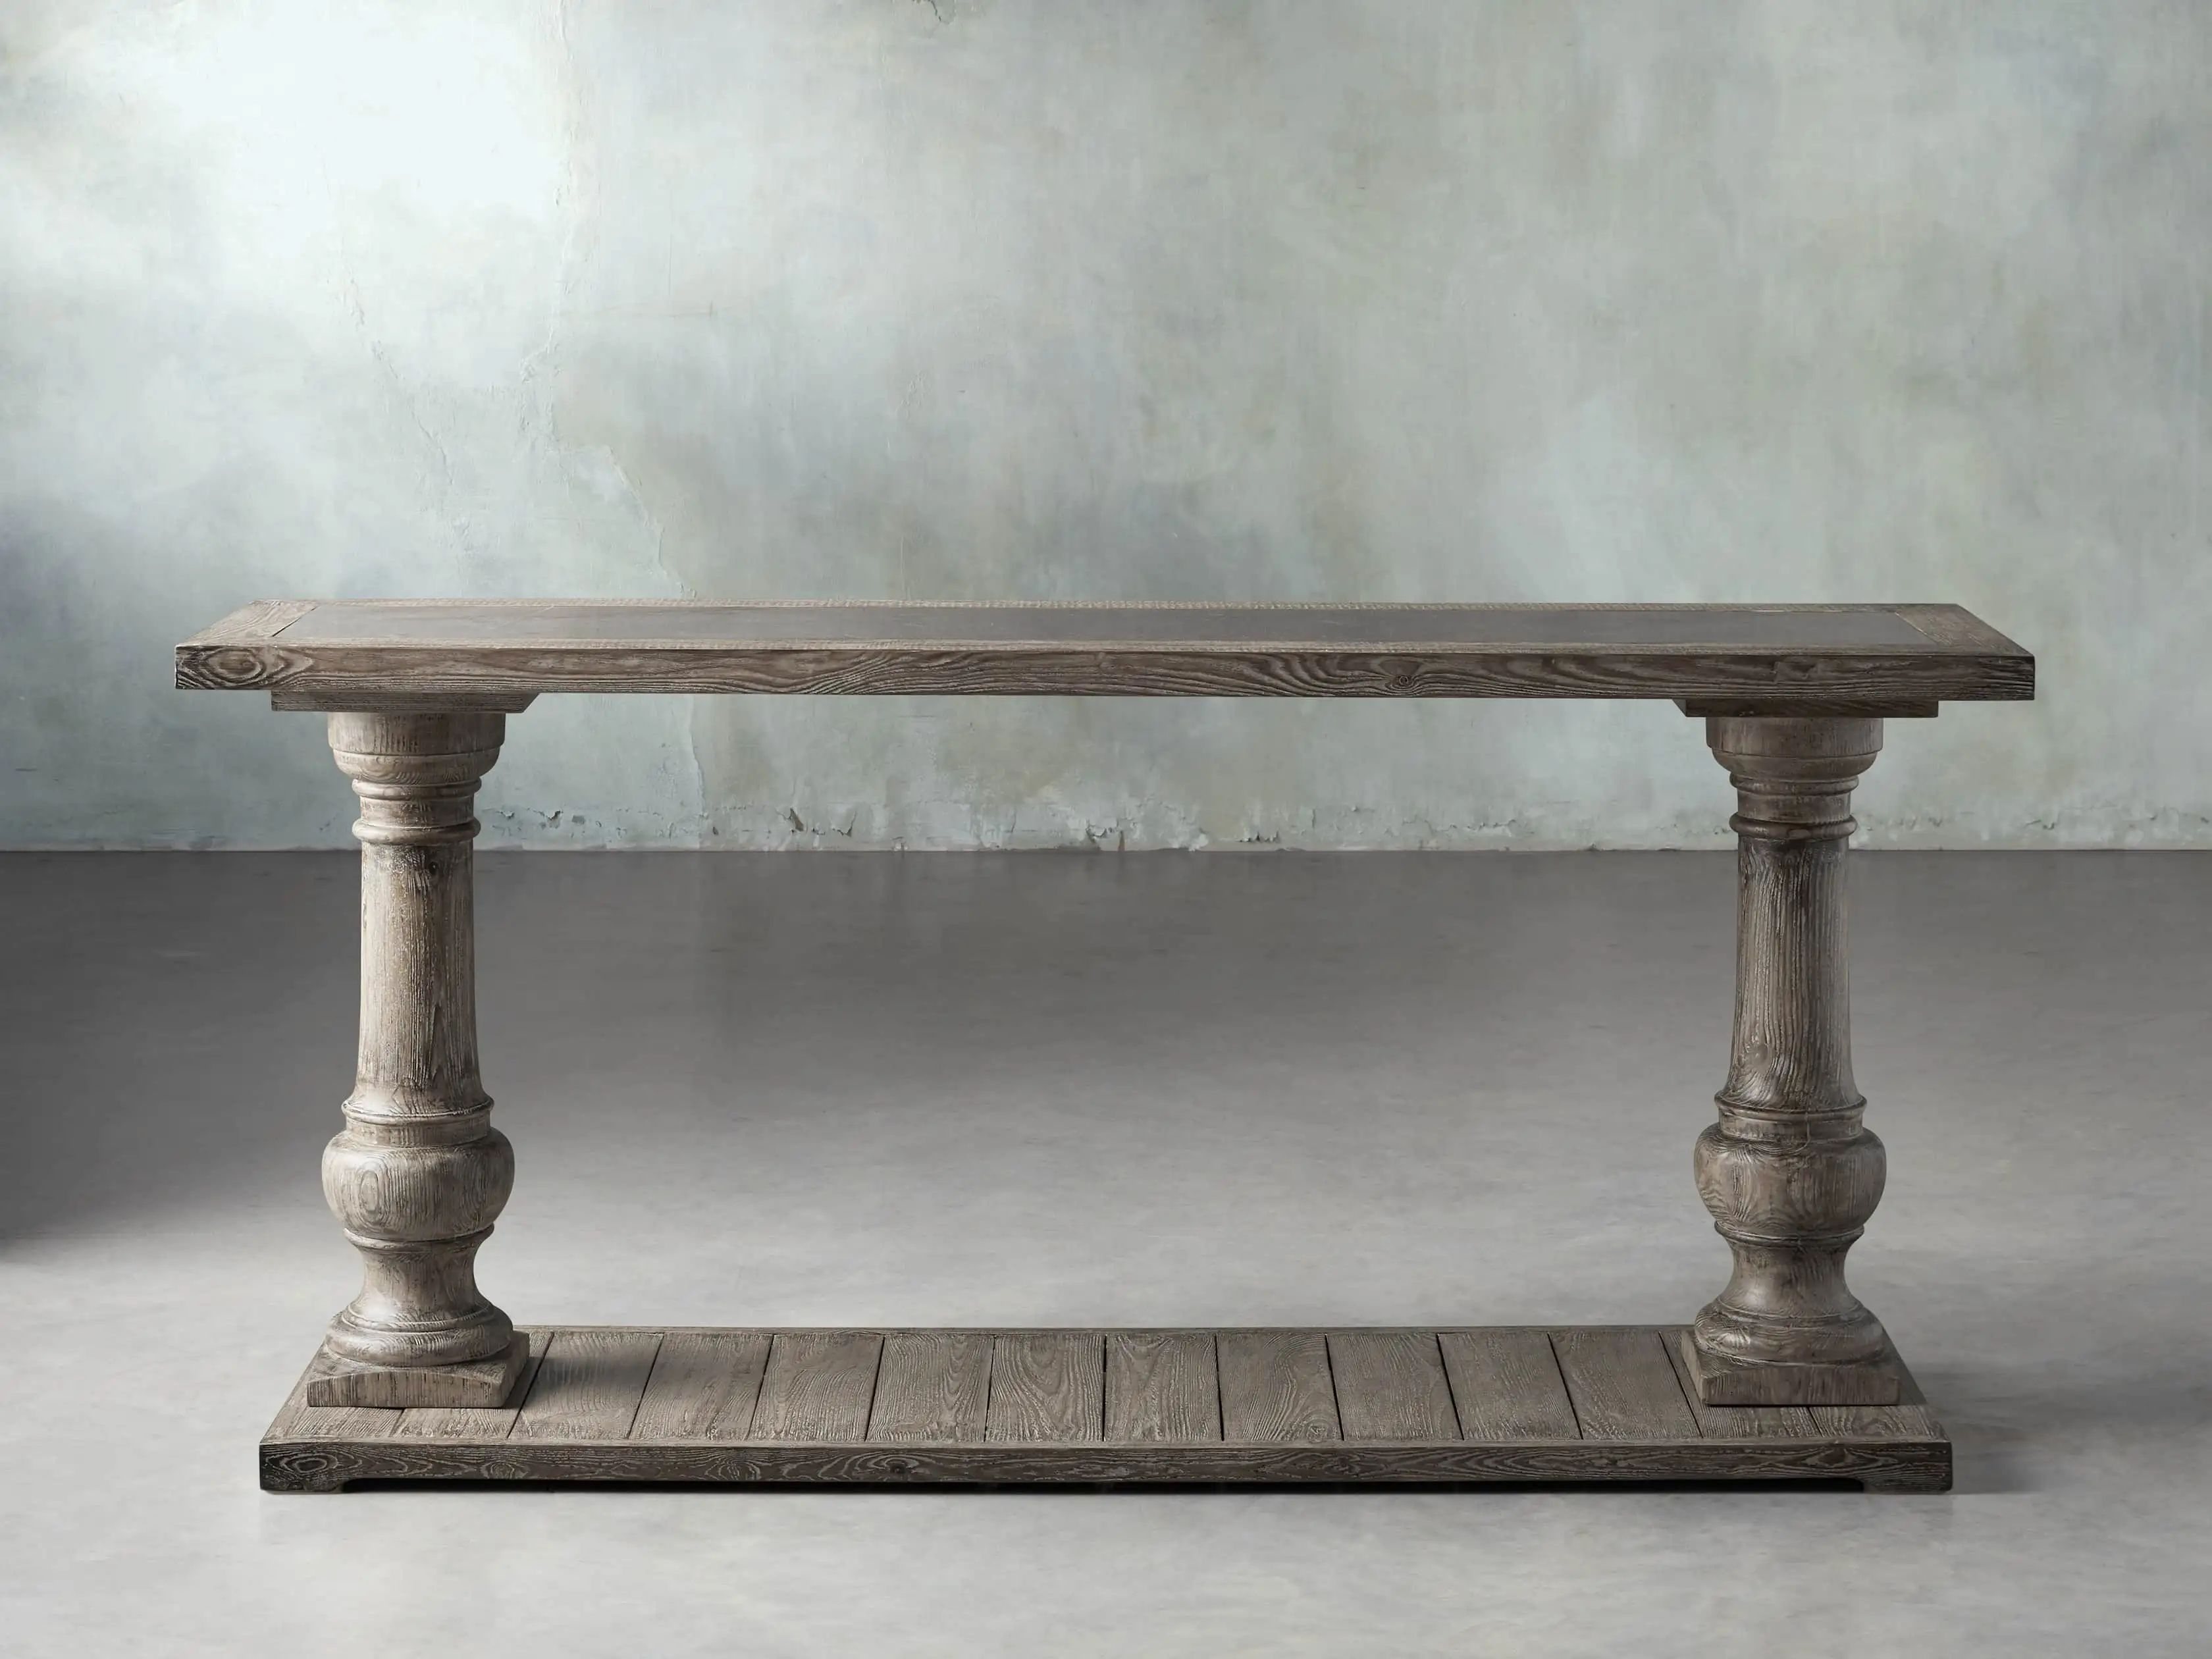 Hudson 71"" Console Table with Bluestone Top | Arhaus